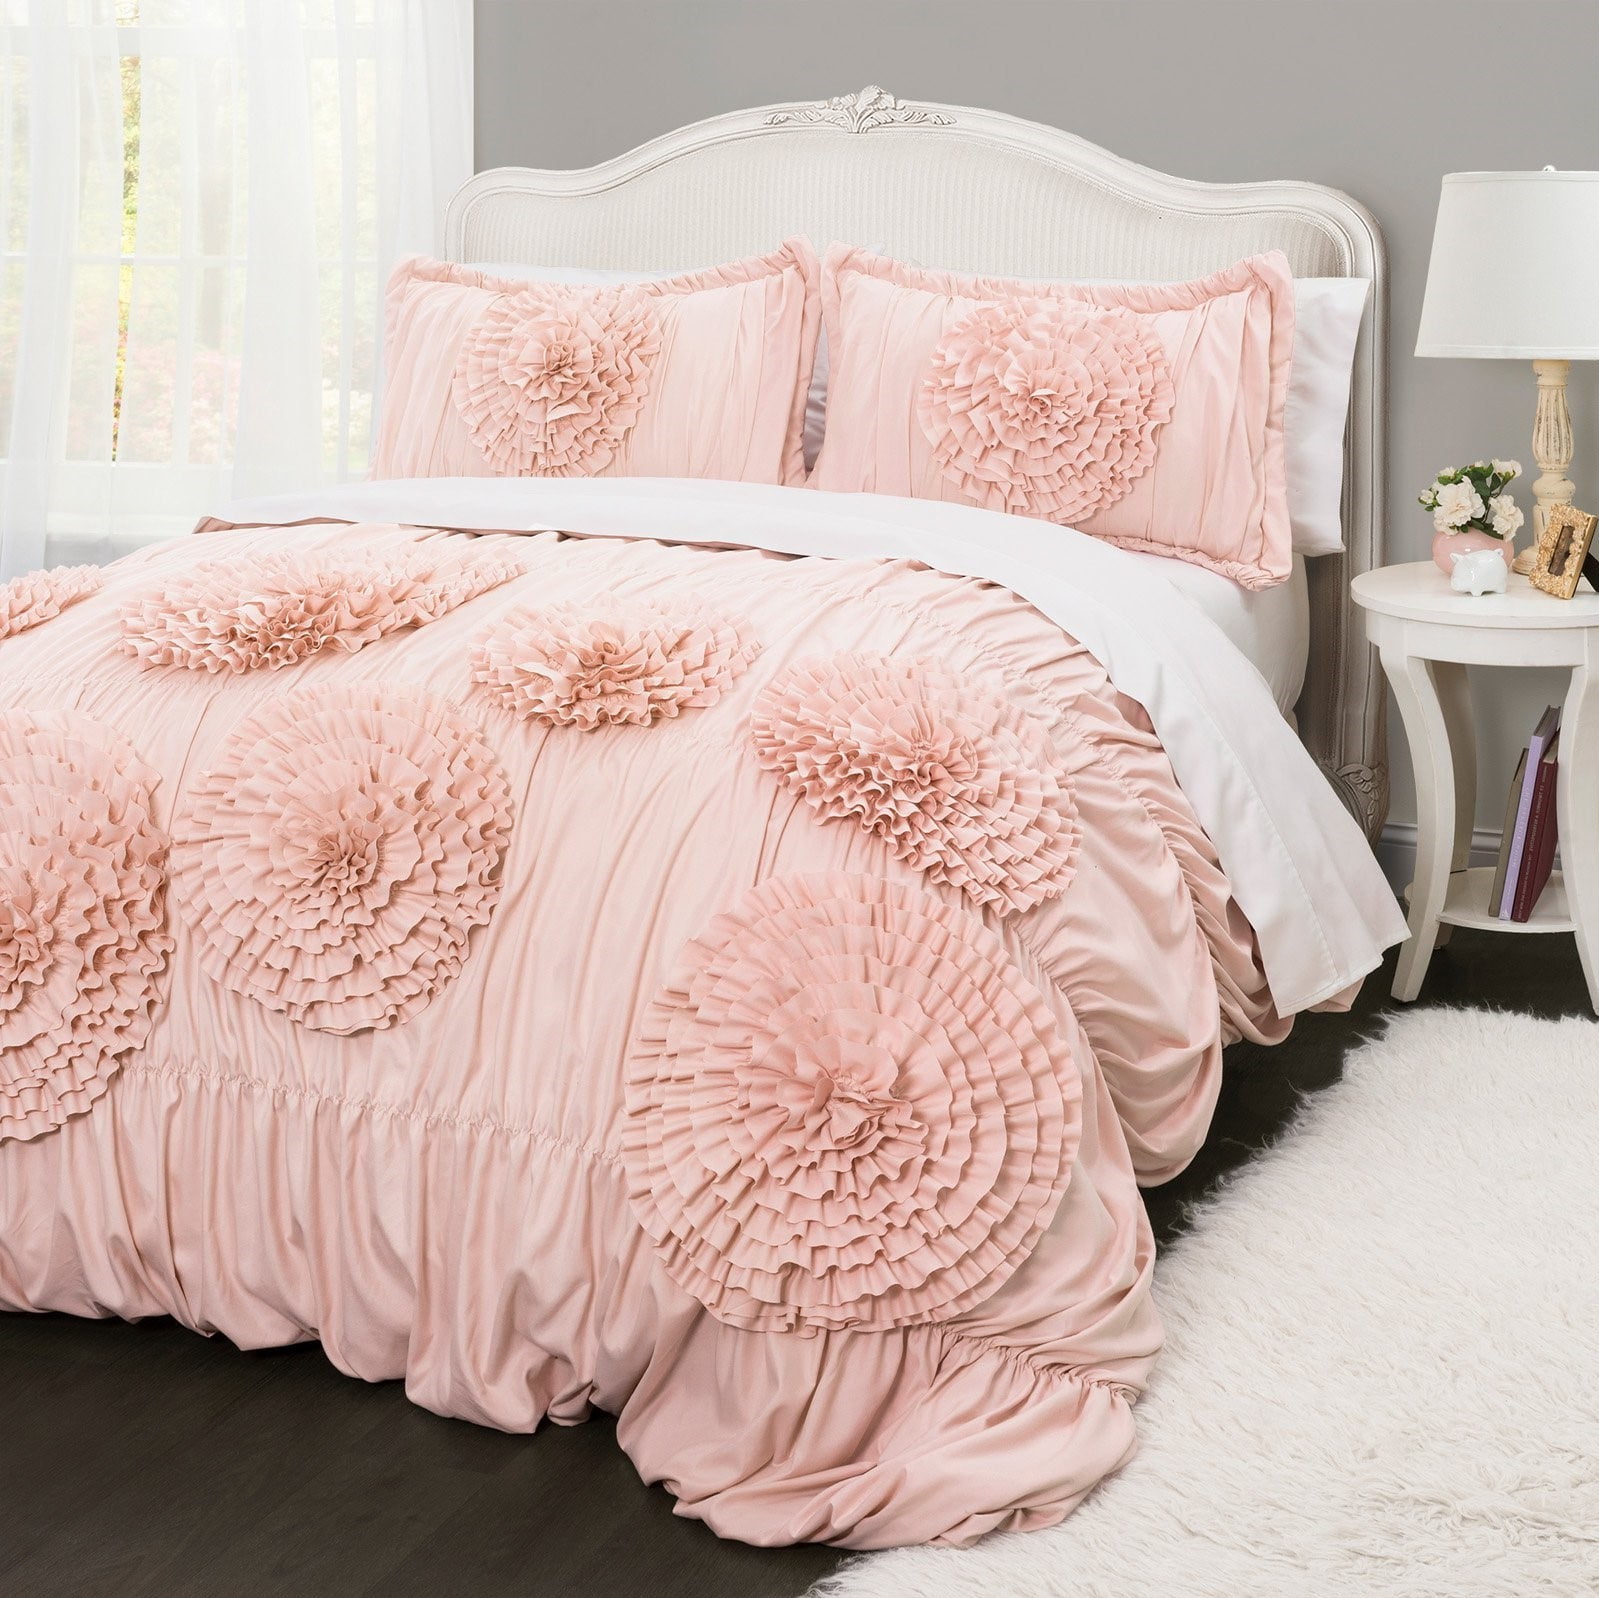 Better Homes And Gardens Ruffled Flowers Handcrafted Comforter